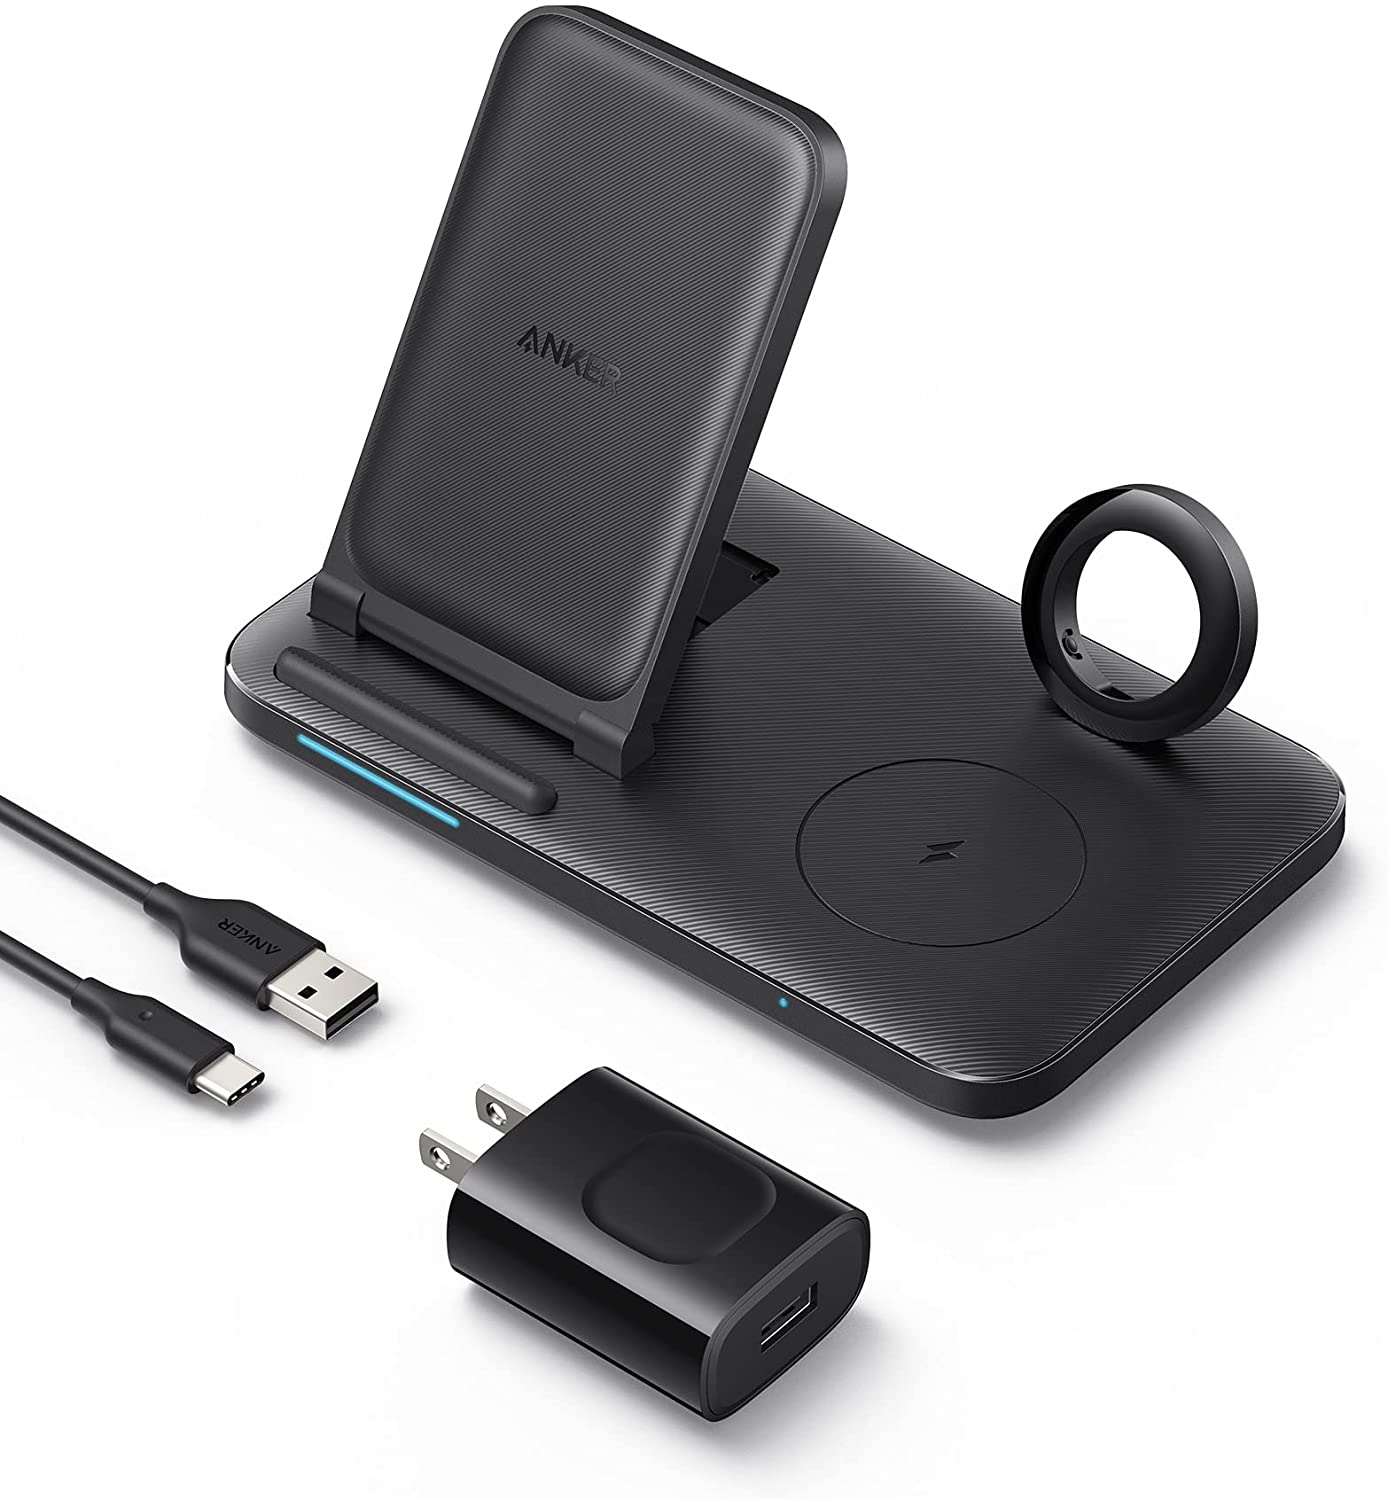 SAVE 20% OFF on Anker 335 Wireless Charger (3-in-1 Station) $23.99